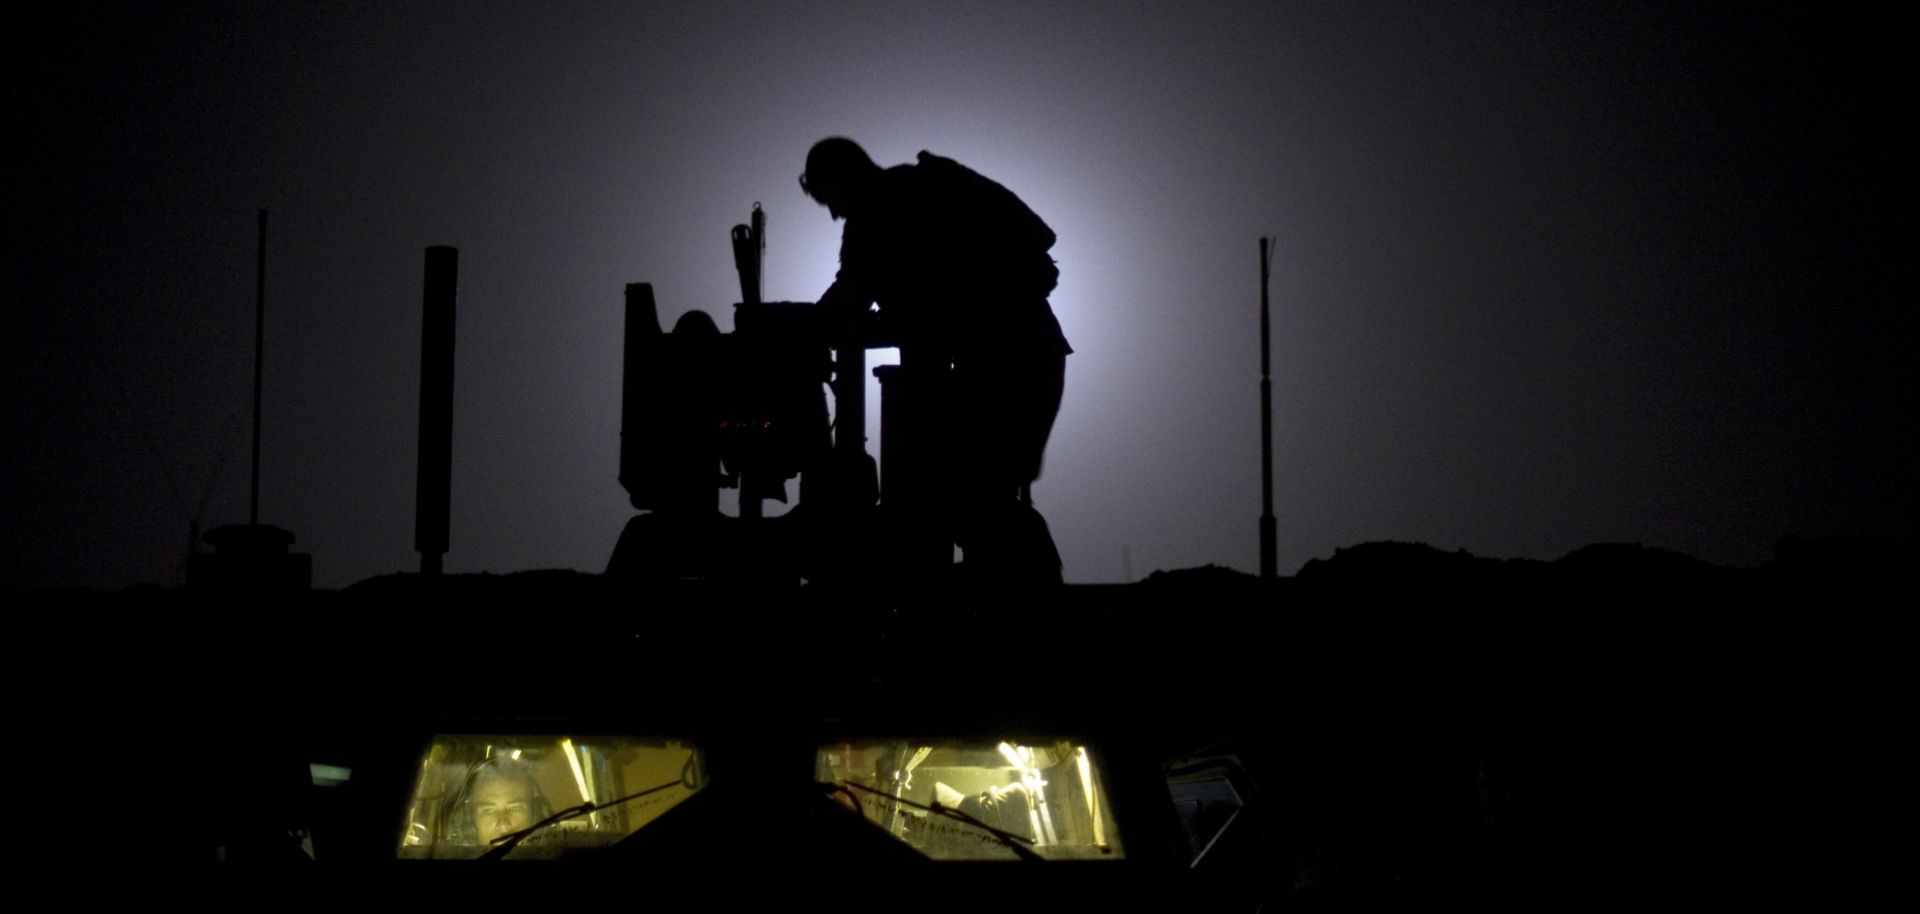 As the 10th anniversary of the Afghanistan War neared in 2011, a U.S. soldier readies his weapon at a forward operating base.